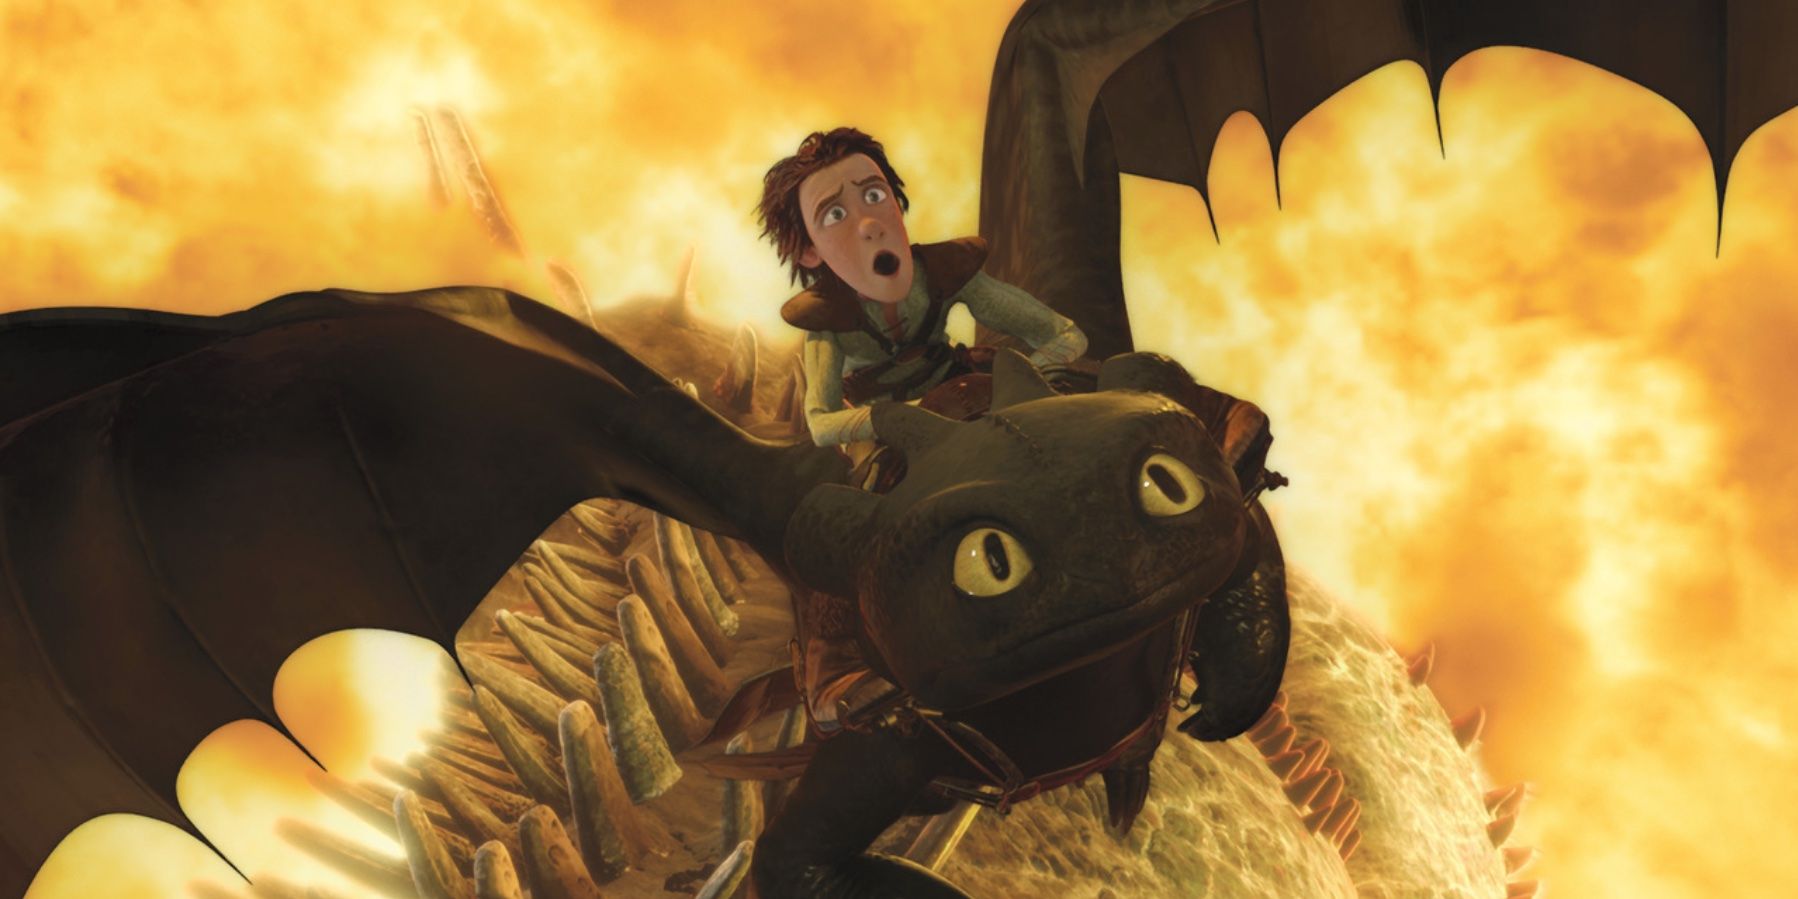 Hiccup flying on toothless with an explosion behind him in 'How To Train Your Dragon'